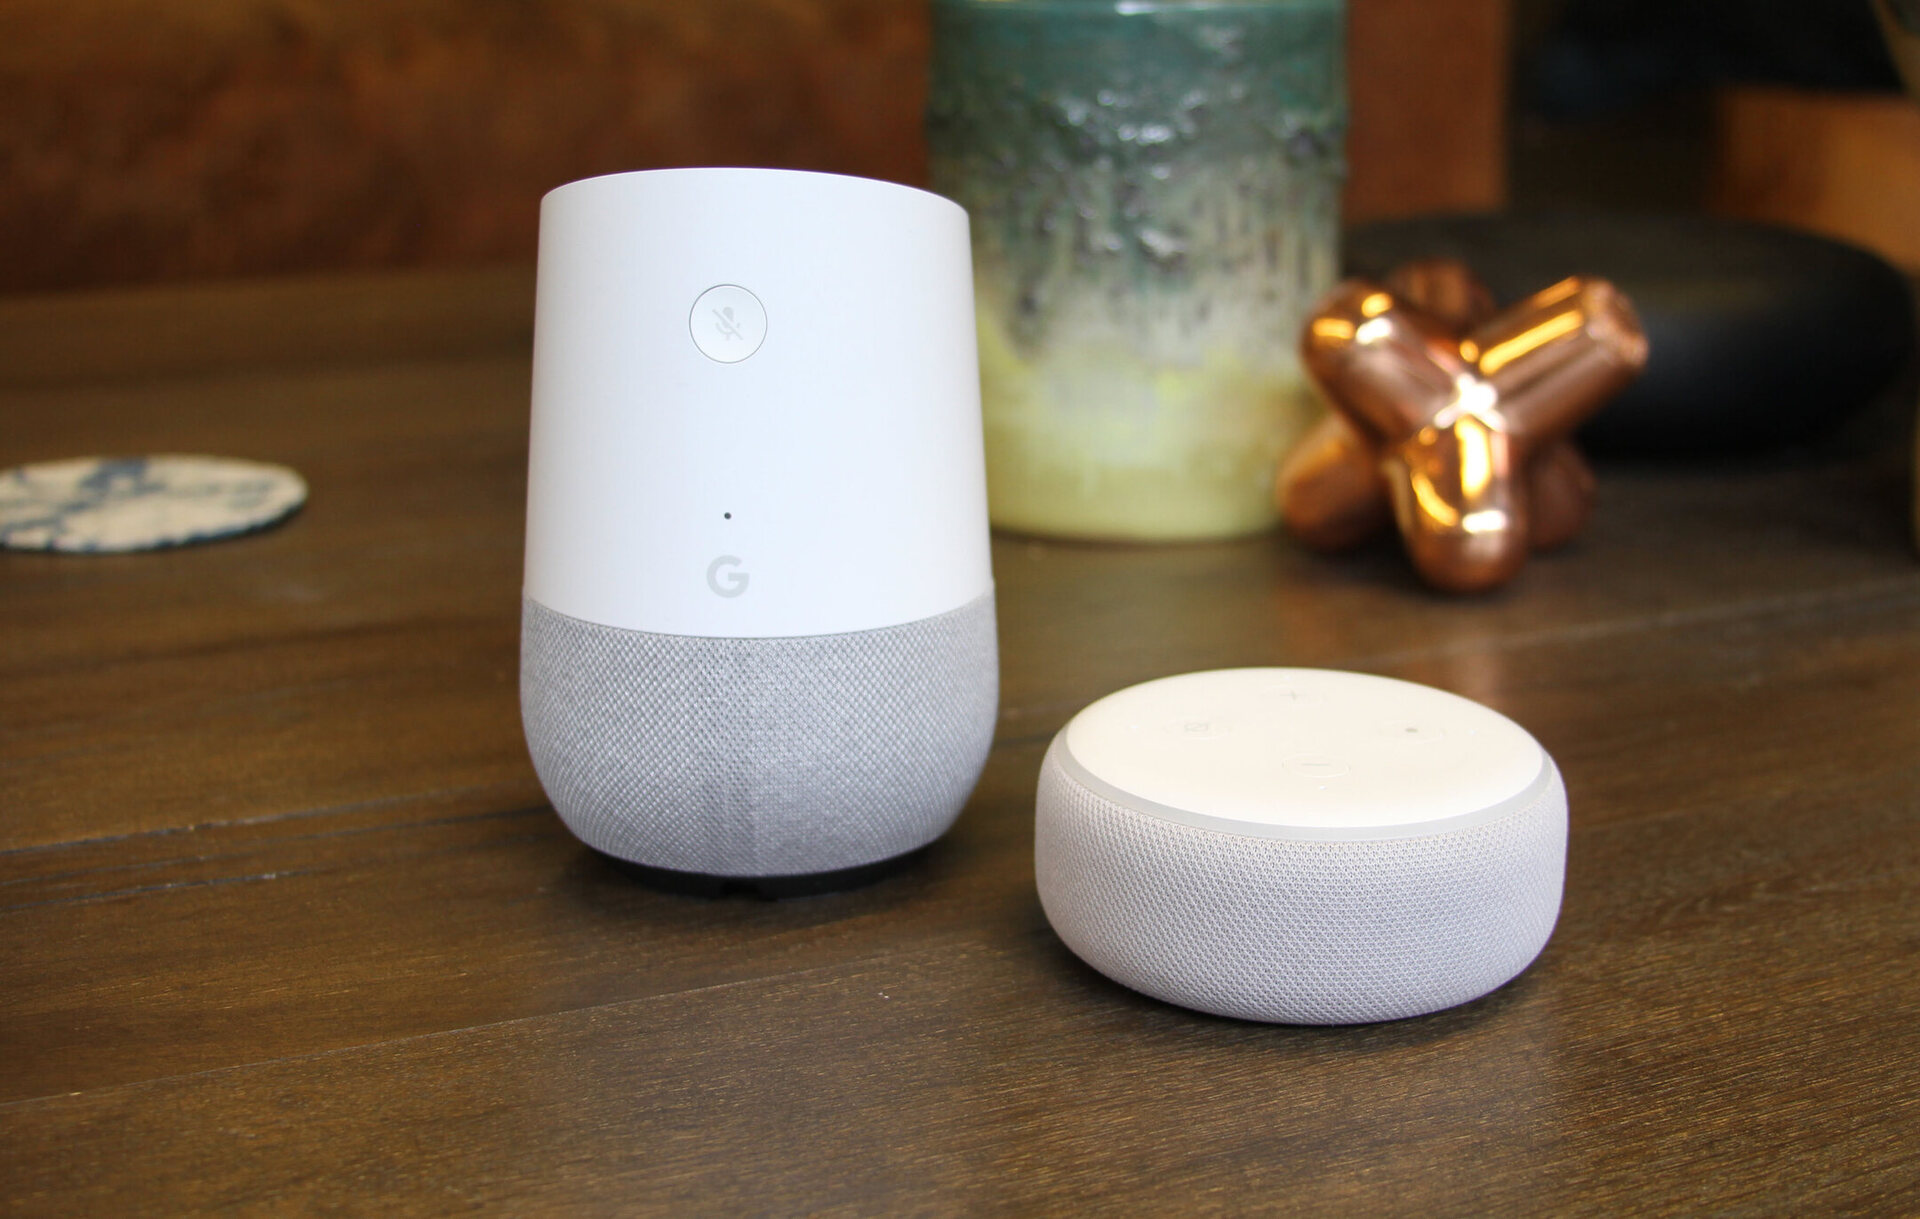 How To Set Up My Google Home?